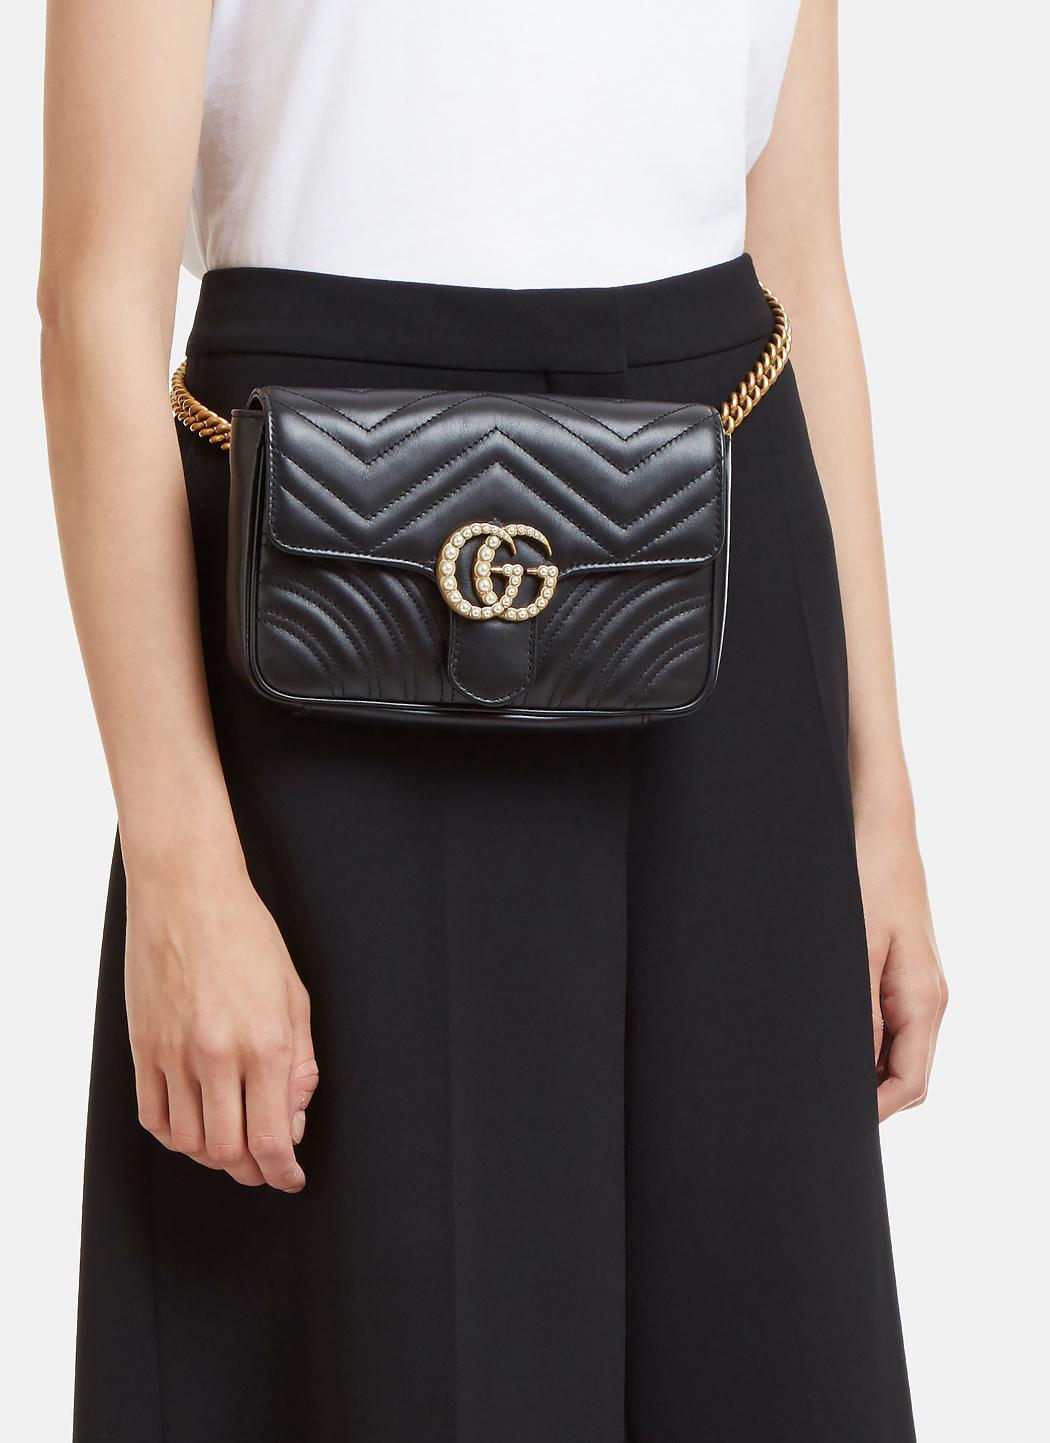 Lyst - Gucci Marmont 2.0 Gg Pearl Bag In Black in Black